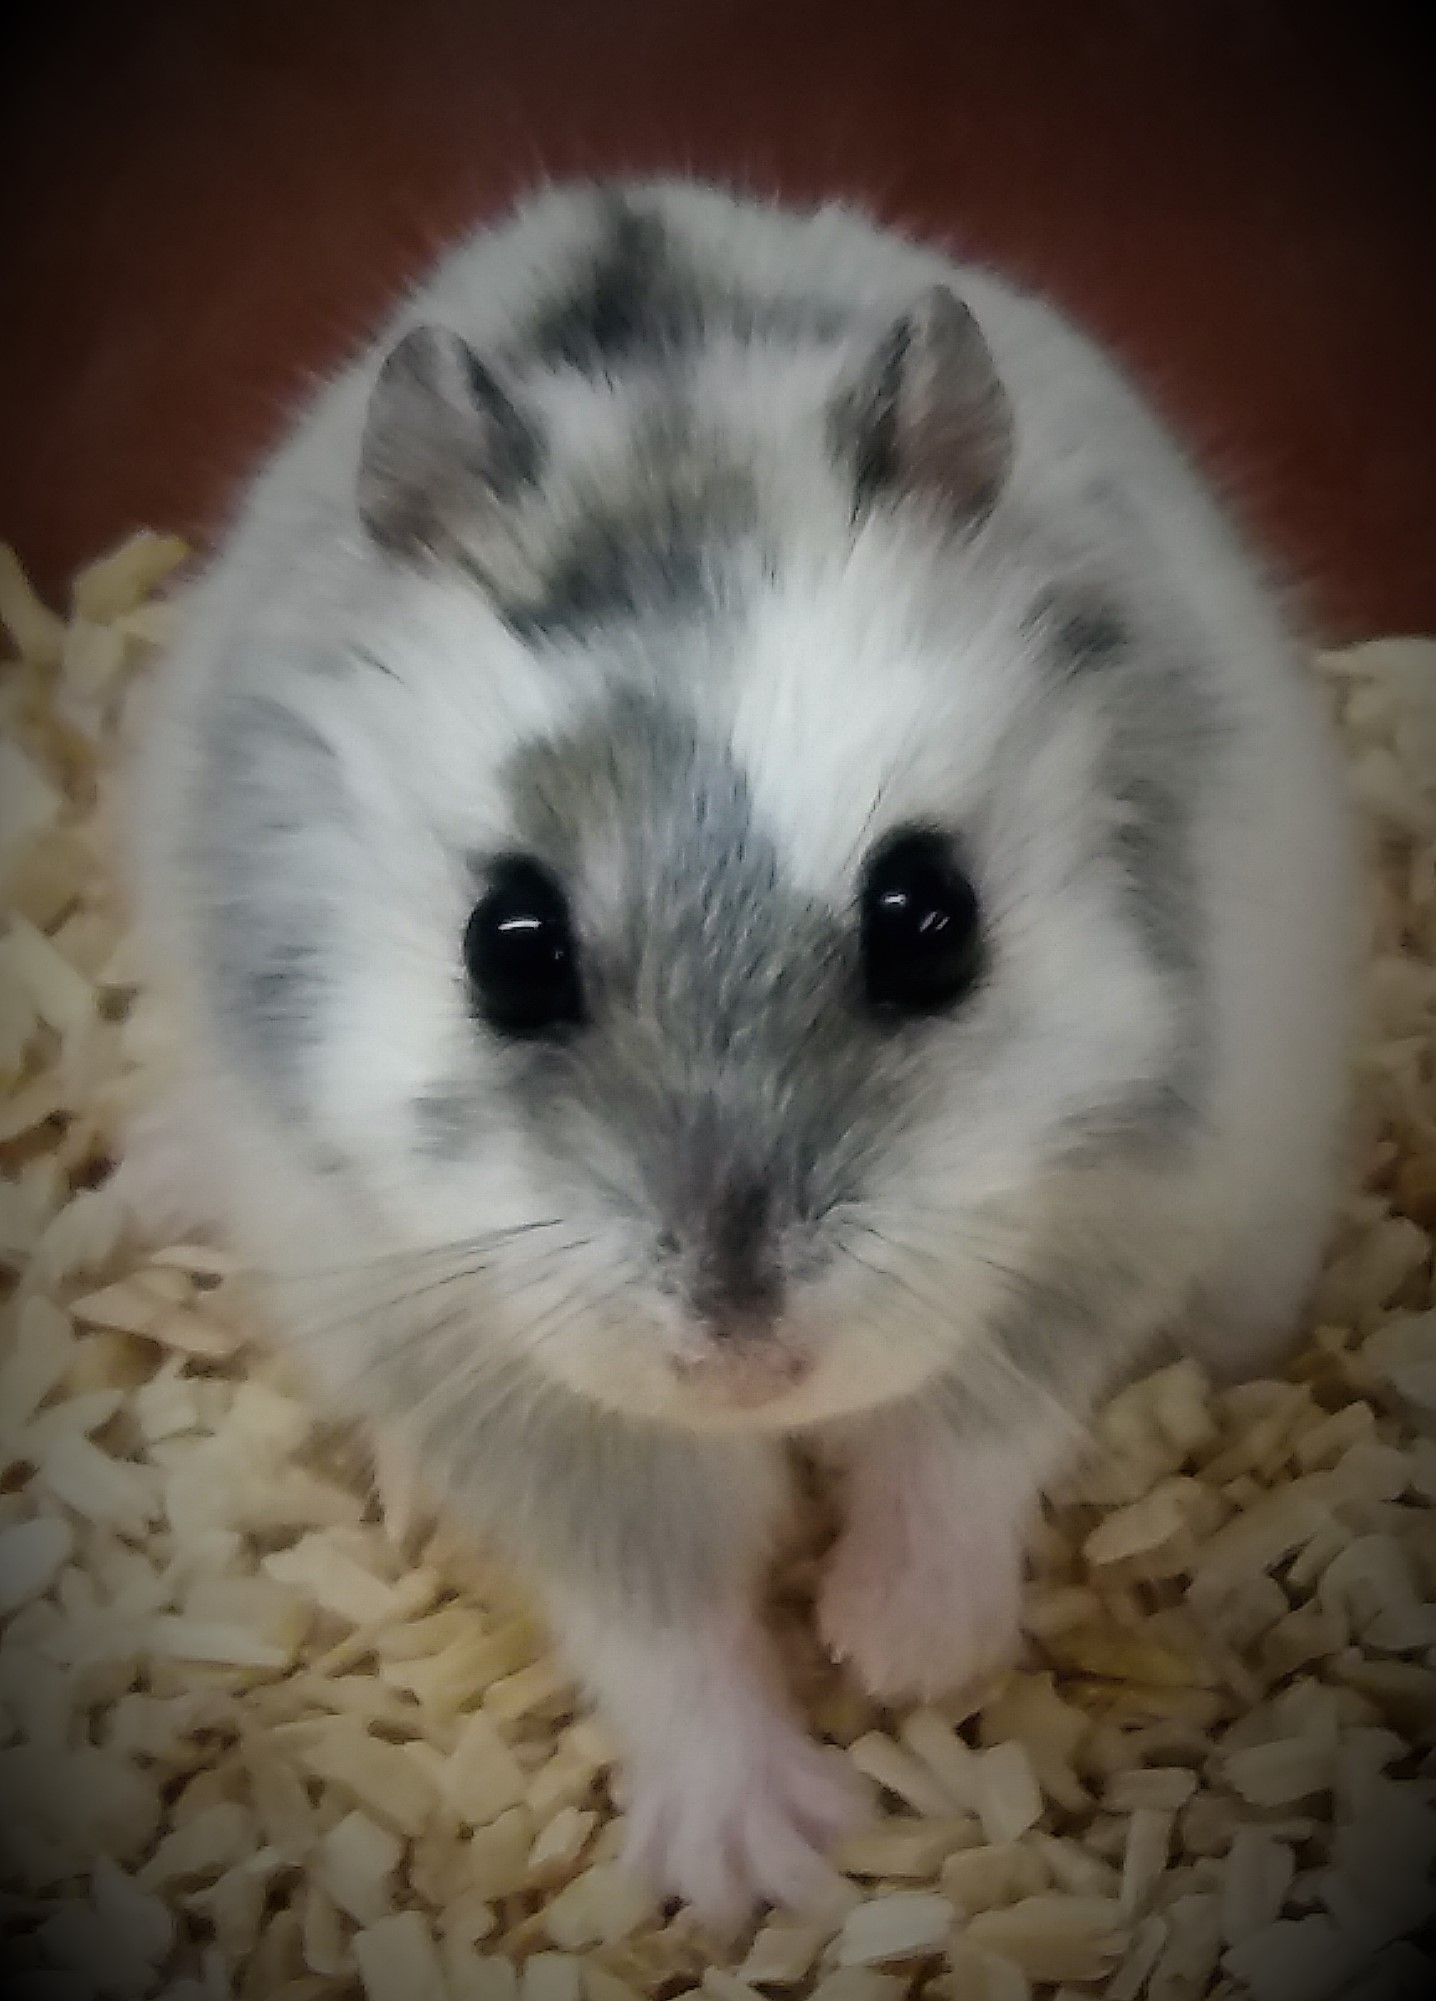 Djungarian hamster during the seasonal moult from the white, well-insulating winter fur to the gray-brown summer fur. In contrast to the moult from summer to winter transition, this fur change from winter to summer is very unstructured and  leaves the  hamsters look like motley cows